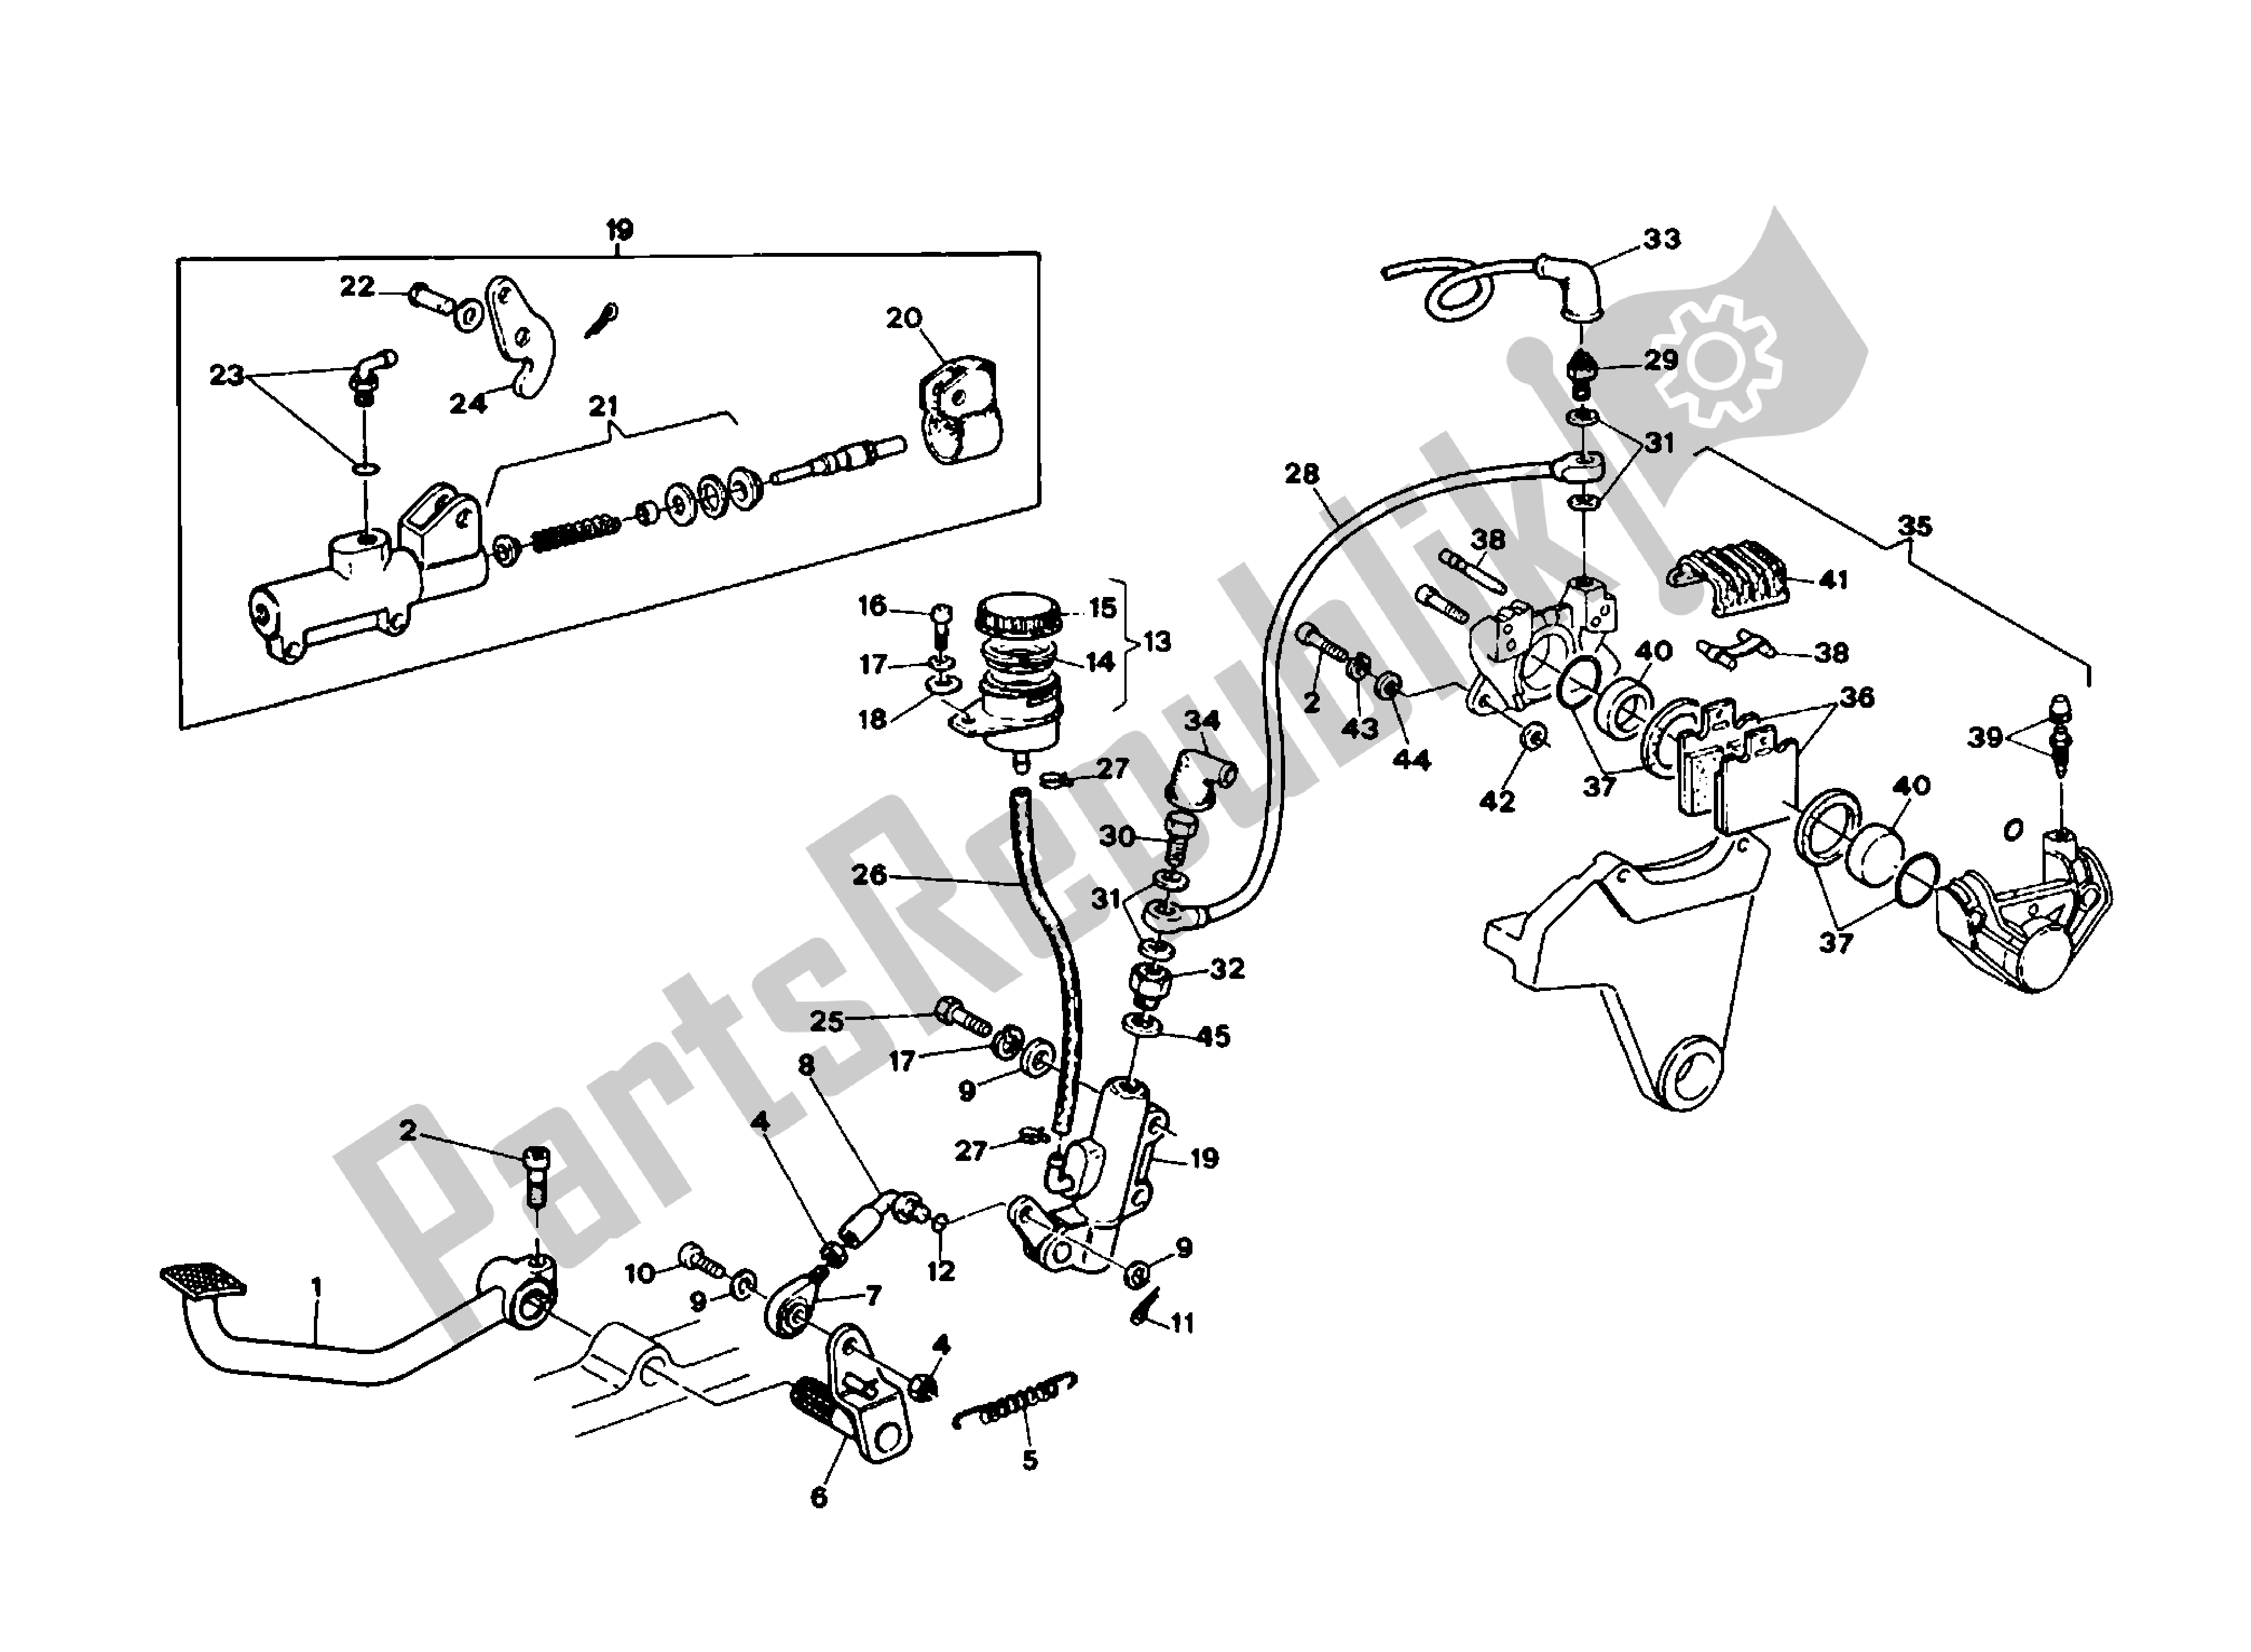 All parts for the Rear Hydraulic Erake of the Ducati Indiana 350 1986 - 1987